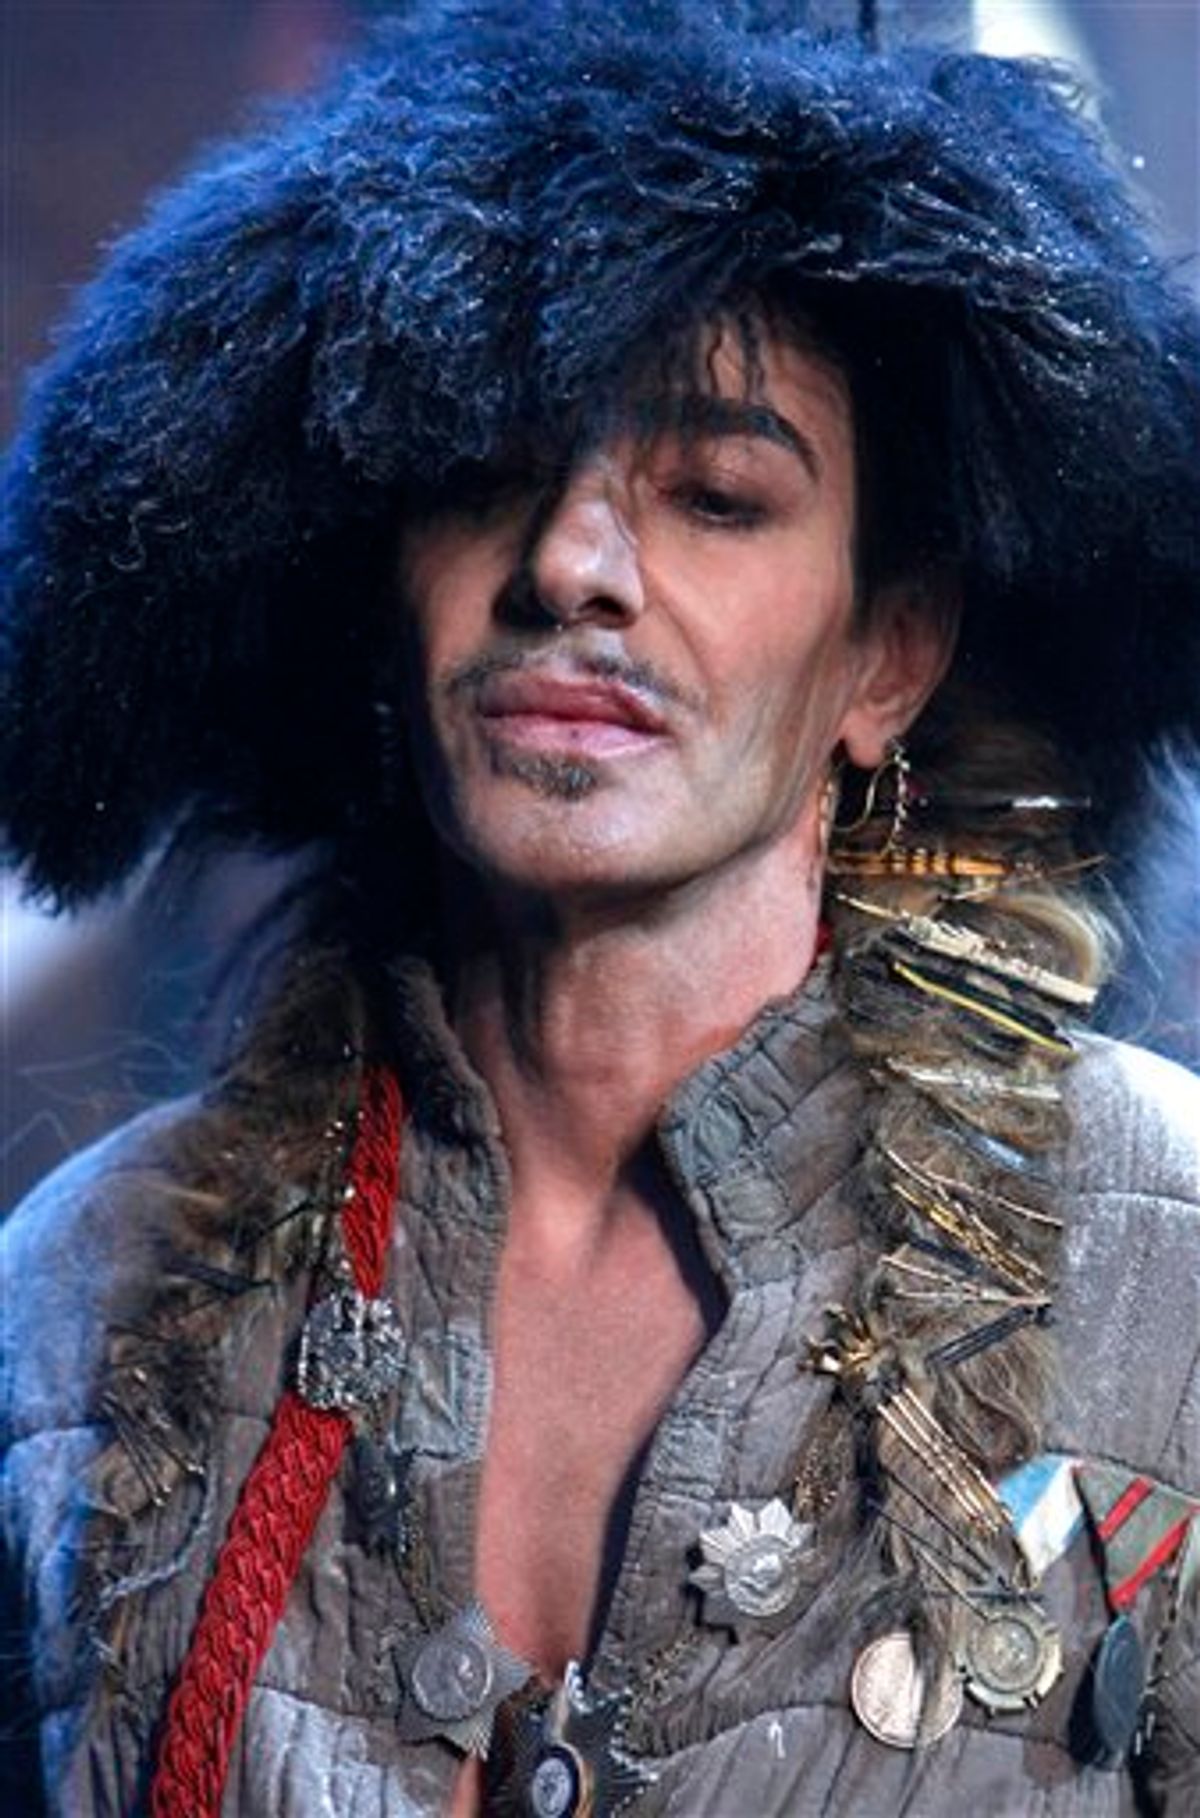 FILE - In this Jan. 21, 2011 file photo, British fashion designer John Galliano appears at the end of his men's fall-winter 2011/2012 fashion collection presented in Paris. Officials say Dior designer John Galliano was briefly detained after a spat in a Paris restaurant. An official with the Paris prosecutor's office says a couple in the restaurant accused Galliano of making anti-Semitic insults. A police official said Friday, Feb. 25, 2011 that Galliano also exchanged slaps with the couple. (AP Photo/Jacques Brinon, File)   (AP)